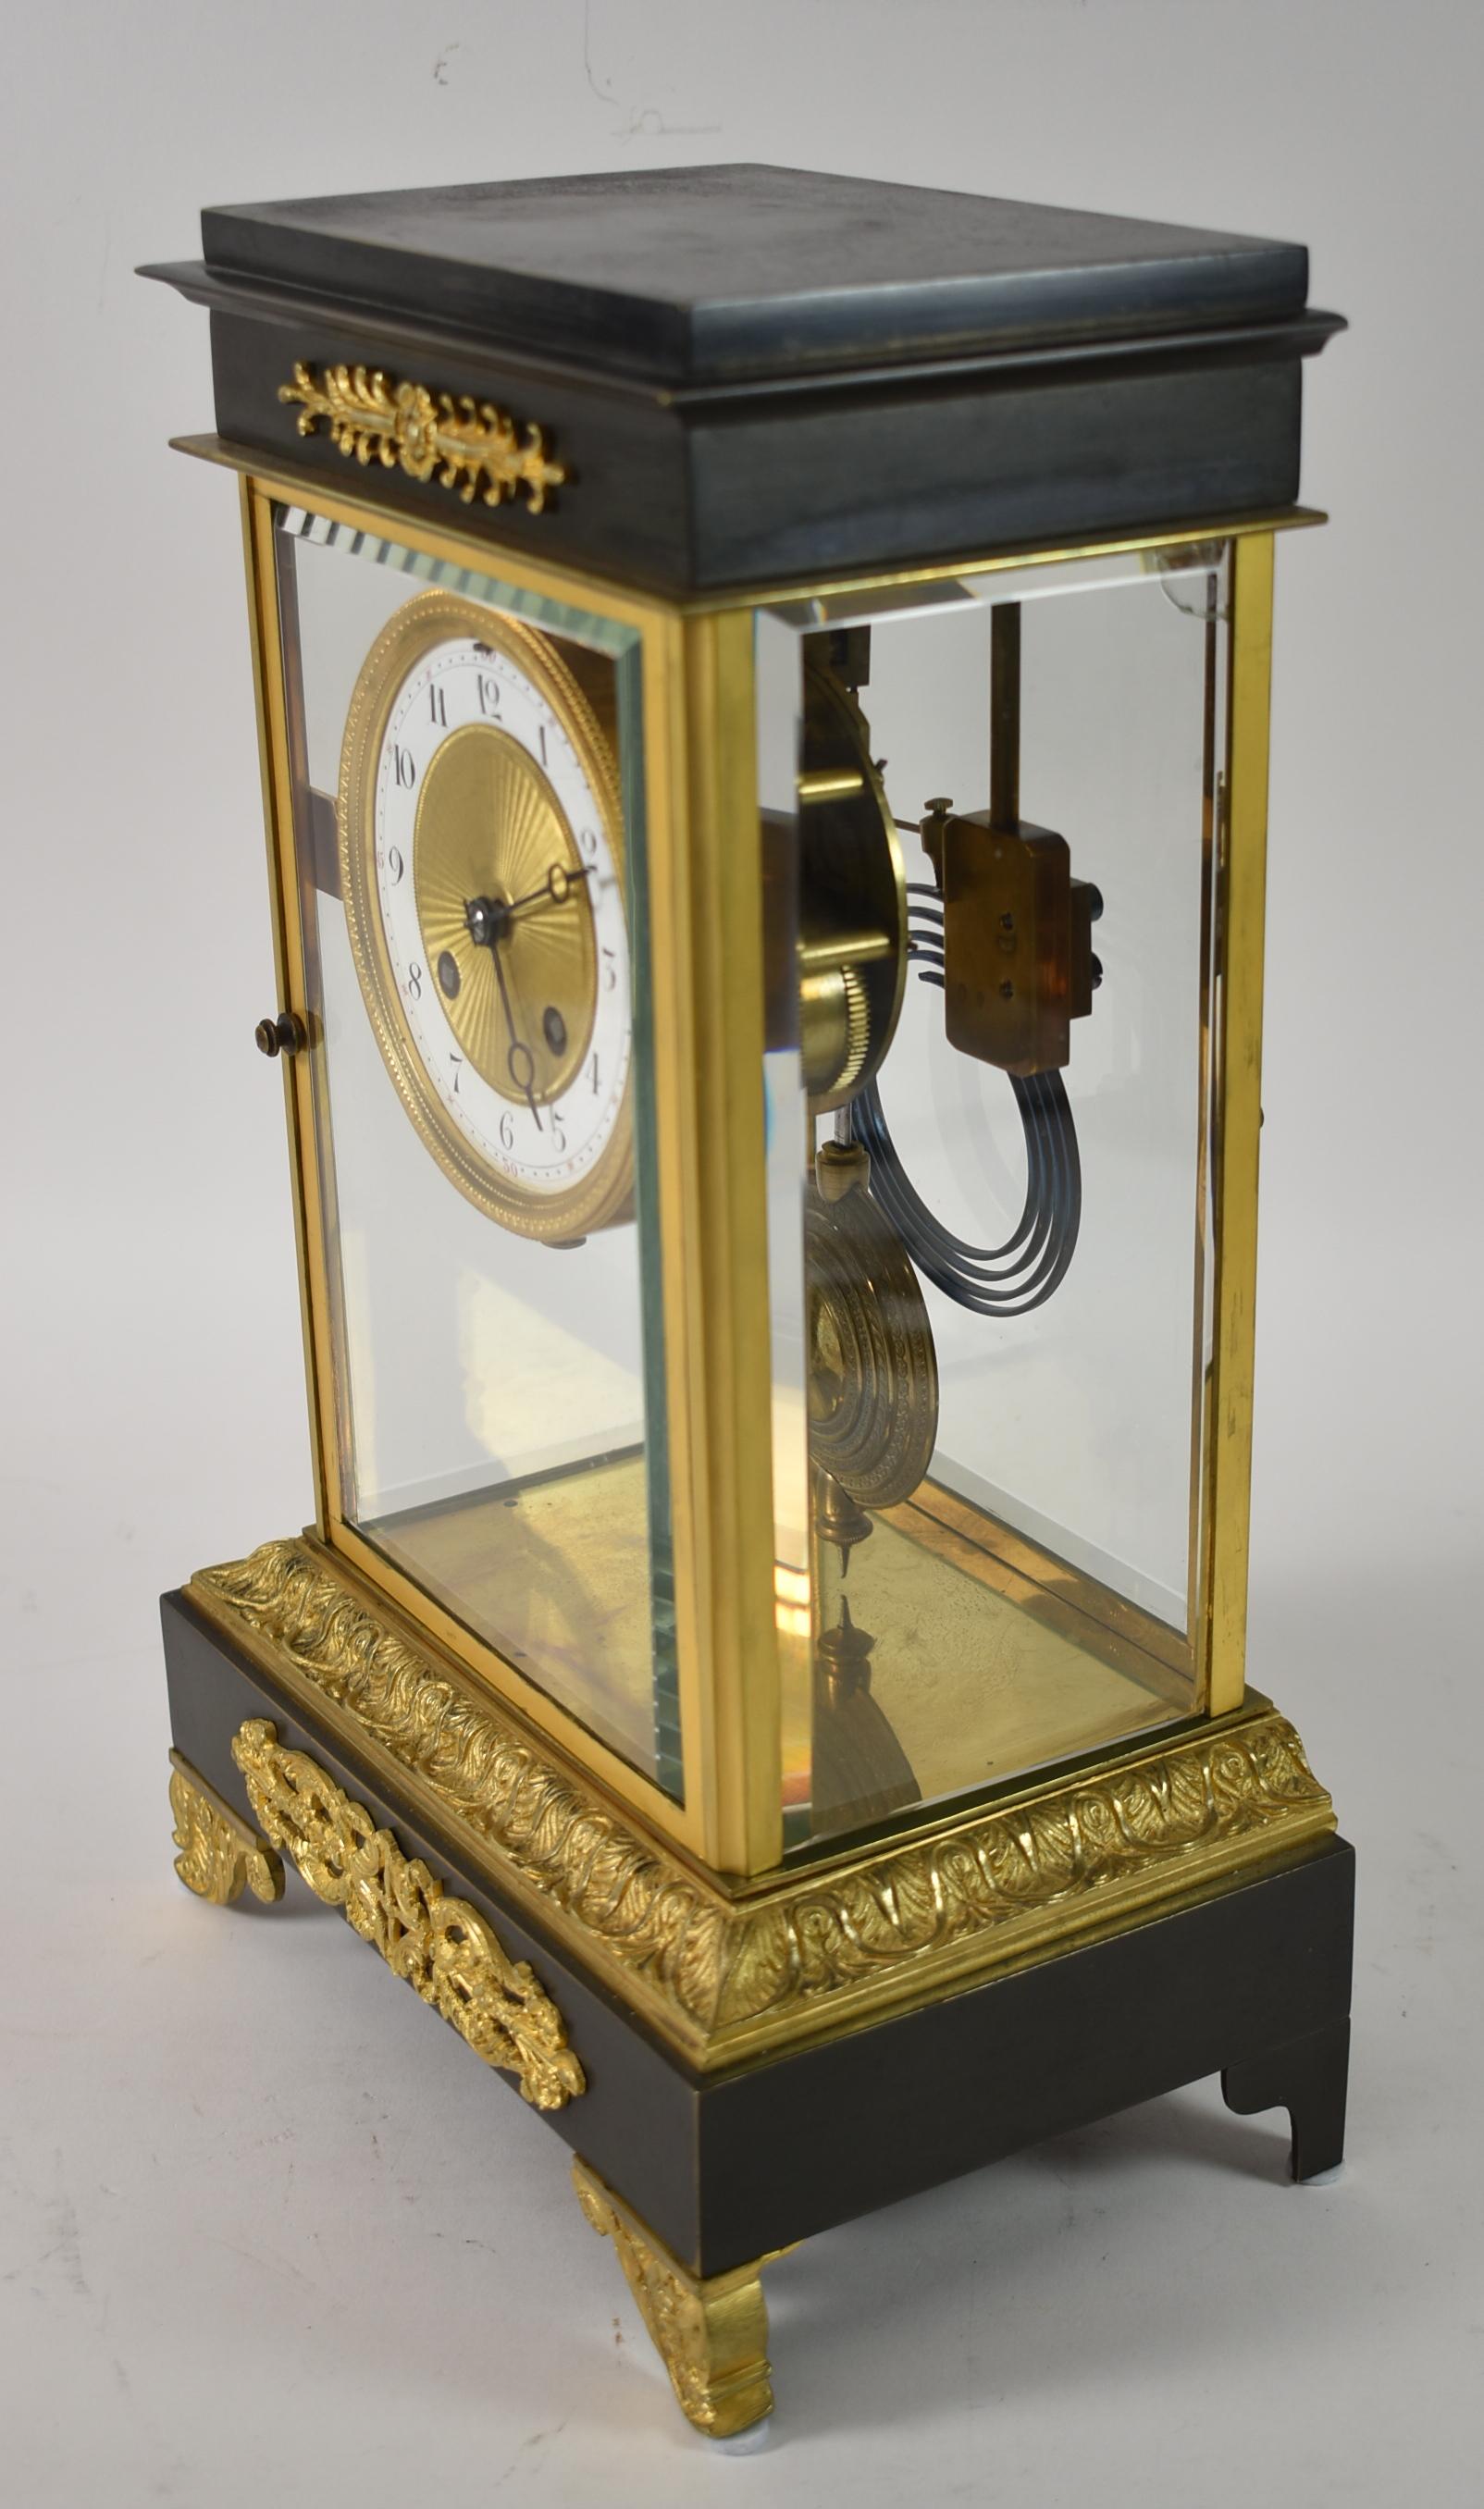 Antique French Empire Crystal Regulator Clock In Good Condition For Sale In Toledo, OH